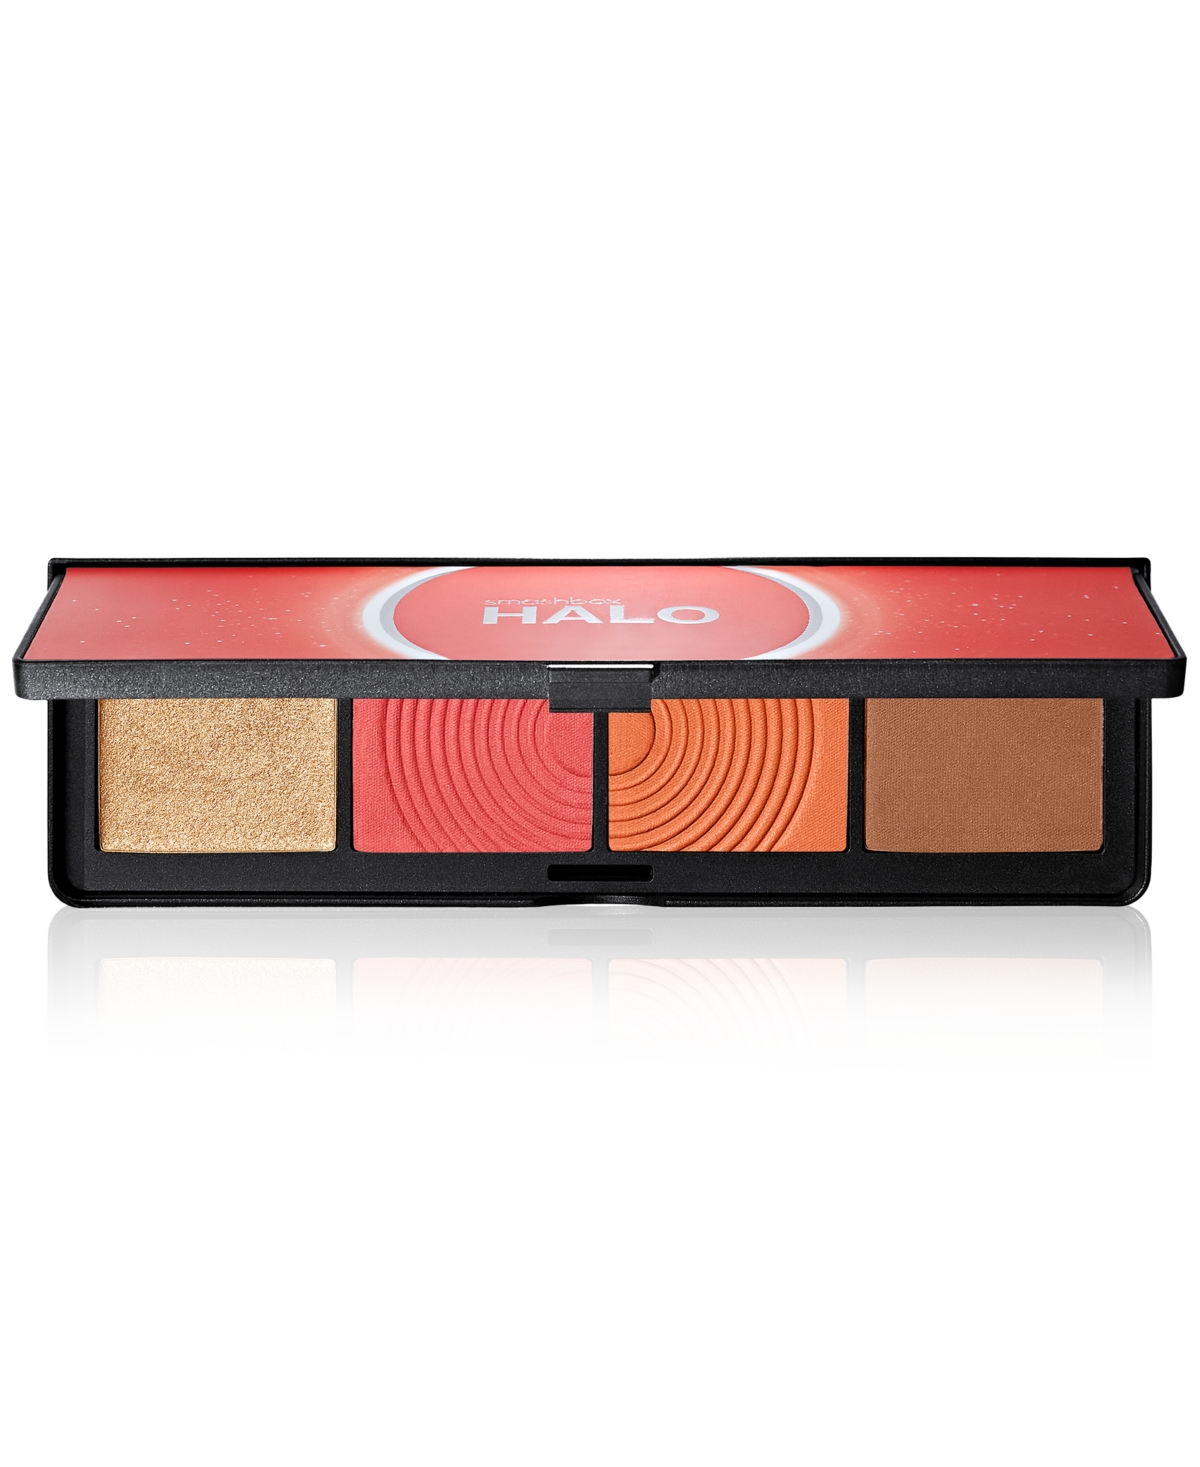 Smashbox Halo Sculpt + Glow Face Palette With Vitamin E In Coral Saturation